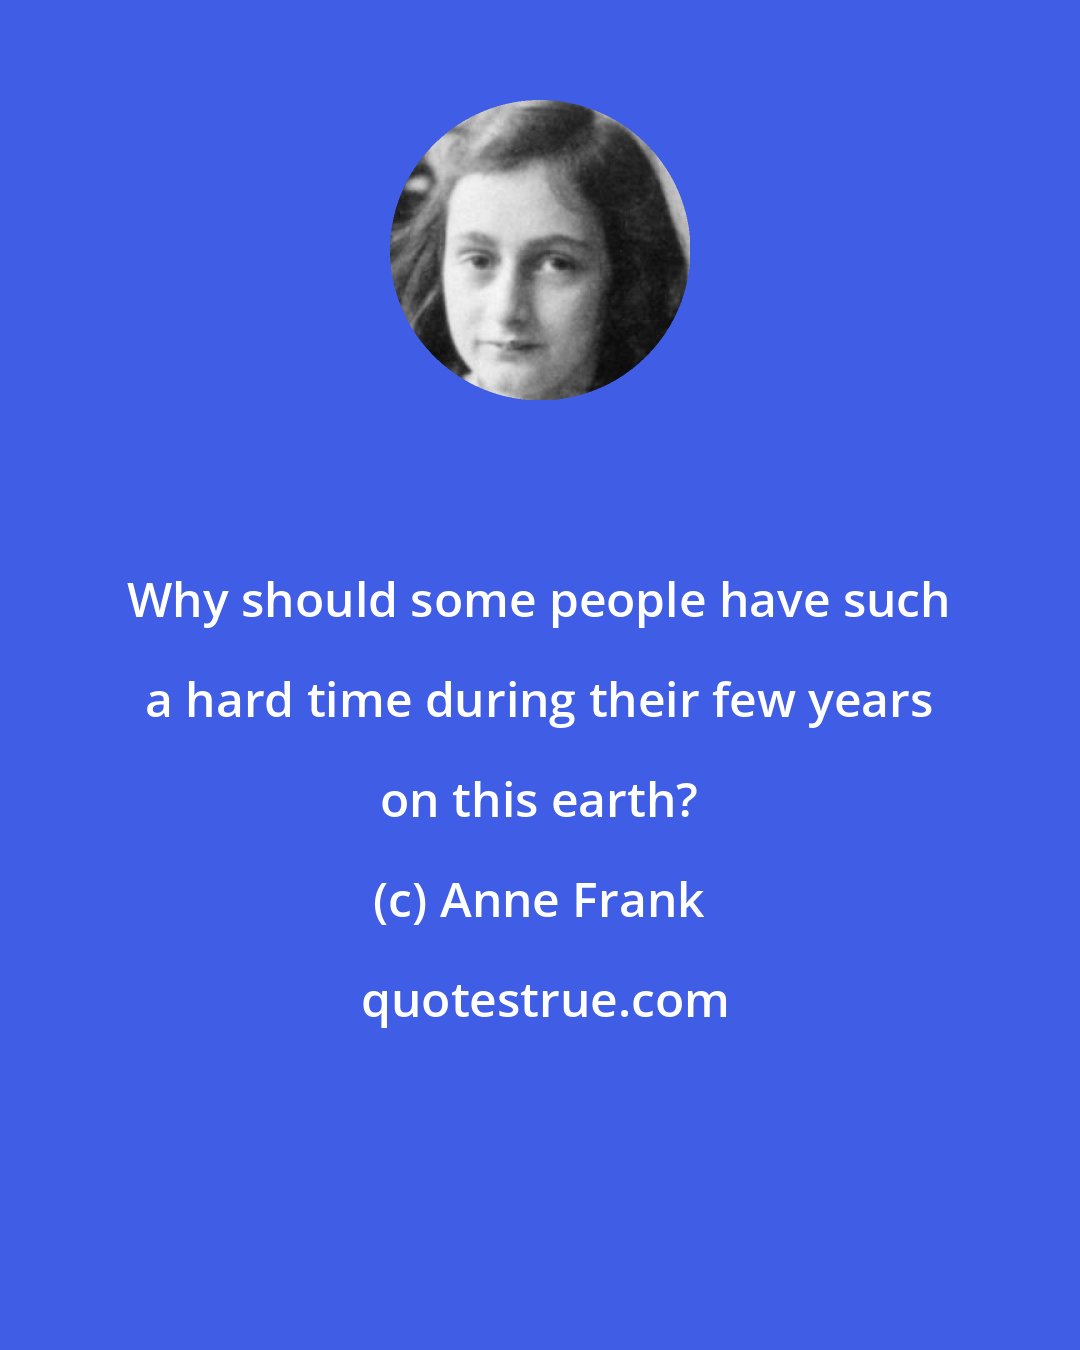 Anne Frank: Why should some people have such a hard time during their few years on this earth?